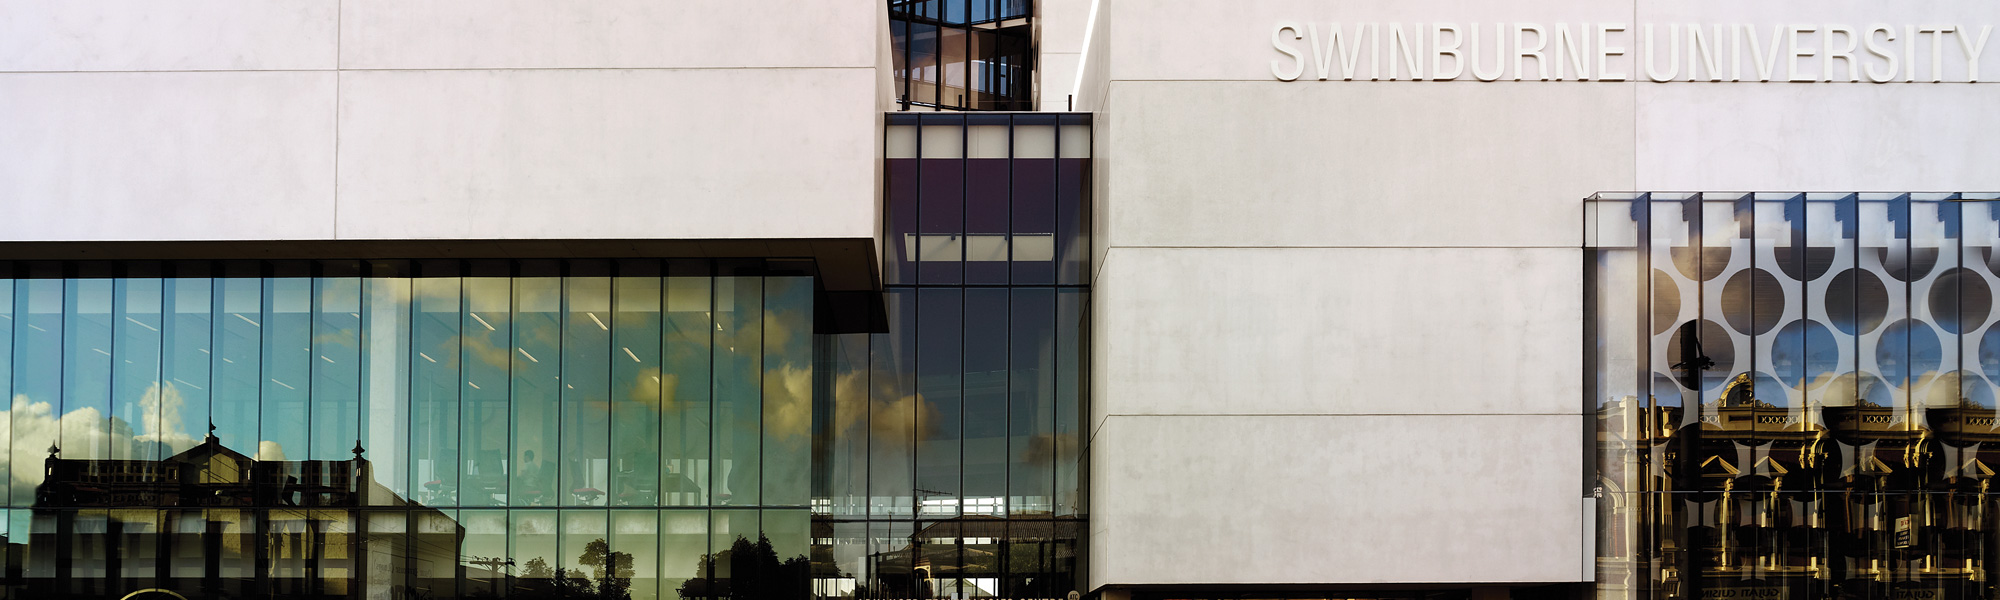 A grey building facade featuring Swinburne University signage and sunlight reflecting off the windows.